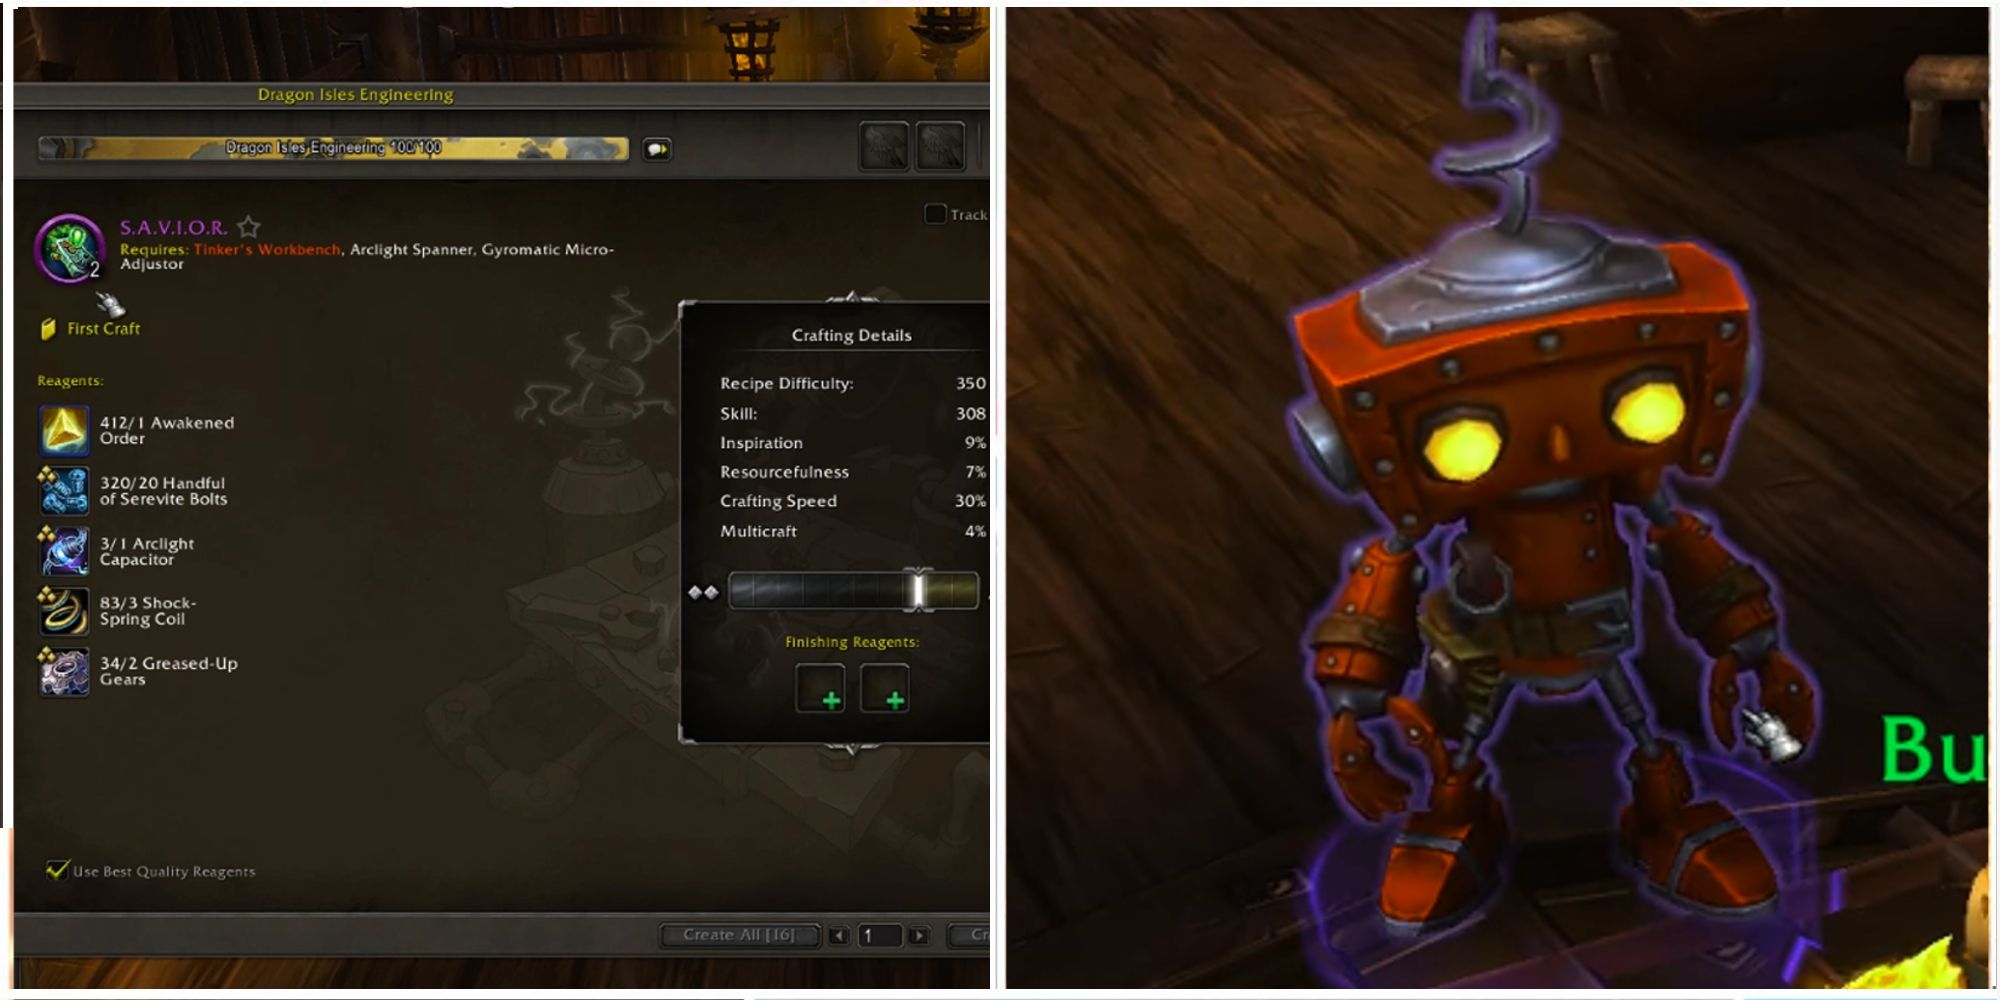 Engineer creates the S.A.V.I.O.R. device as seen in World of Warcraft Dragonflight